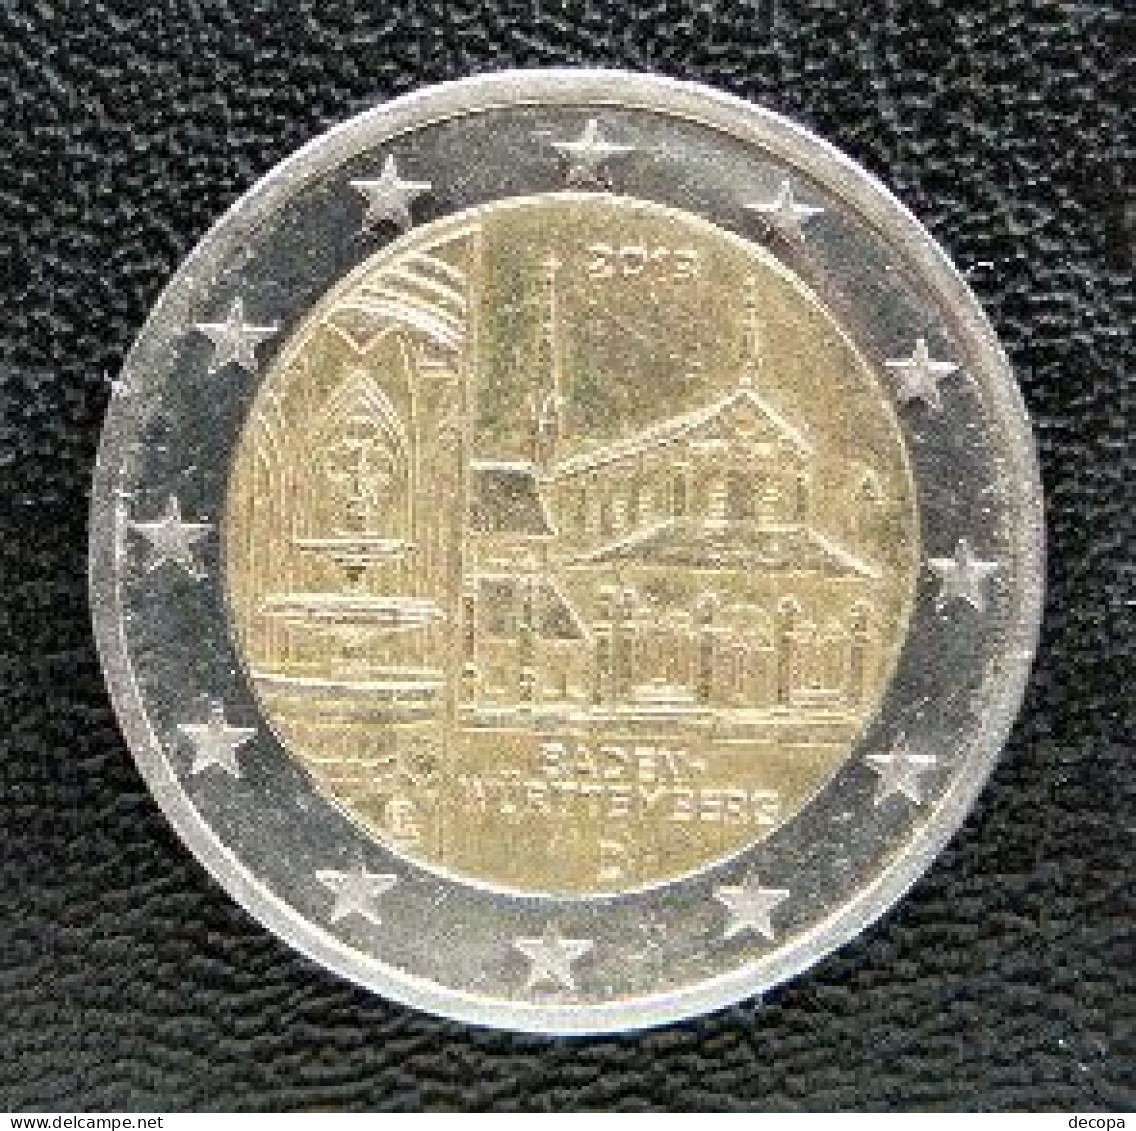 Germany - Allemagne - Duitsland   2 EURO 2013 A     Speciale Uitgave - Commemorative - Germany